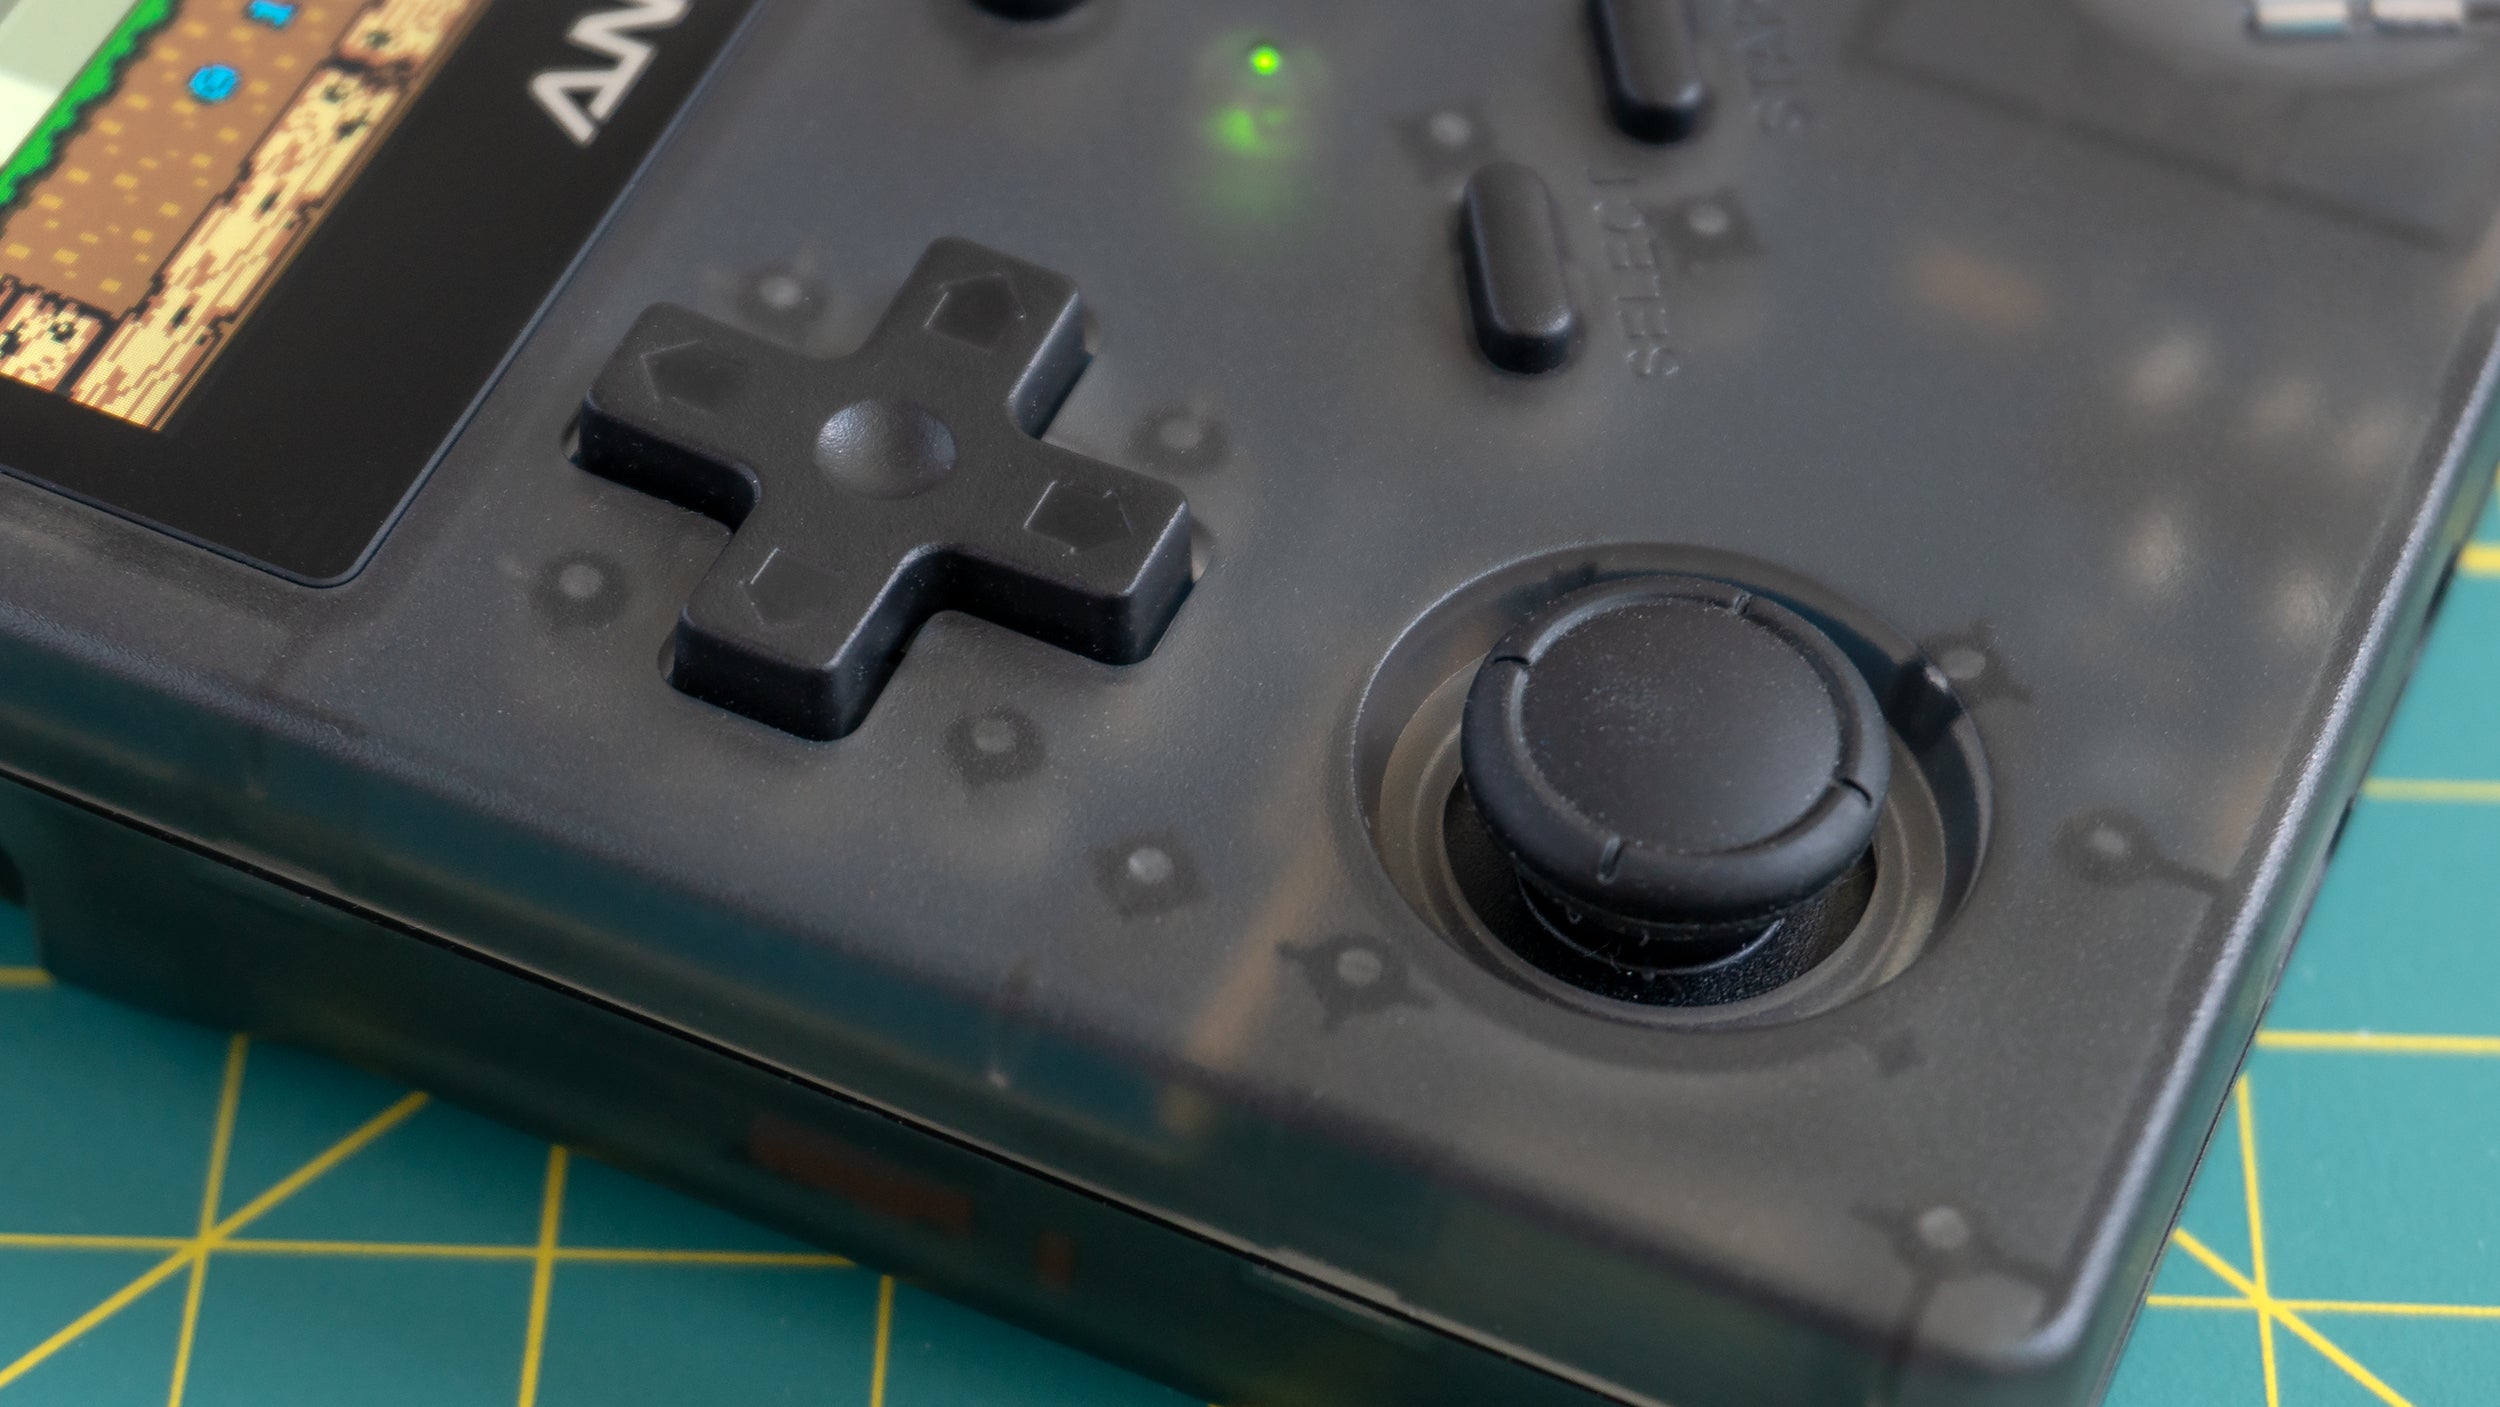 The choice to include just a single analogue joystick is questionable, and its position makes it hard to reach while keeping fingers on the shoulder buttons on back. (Photo: Andrew Liszewski/Gizmodo)